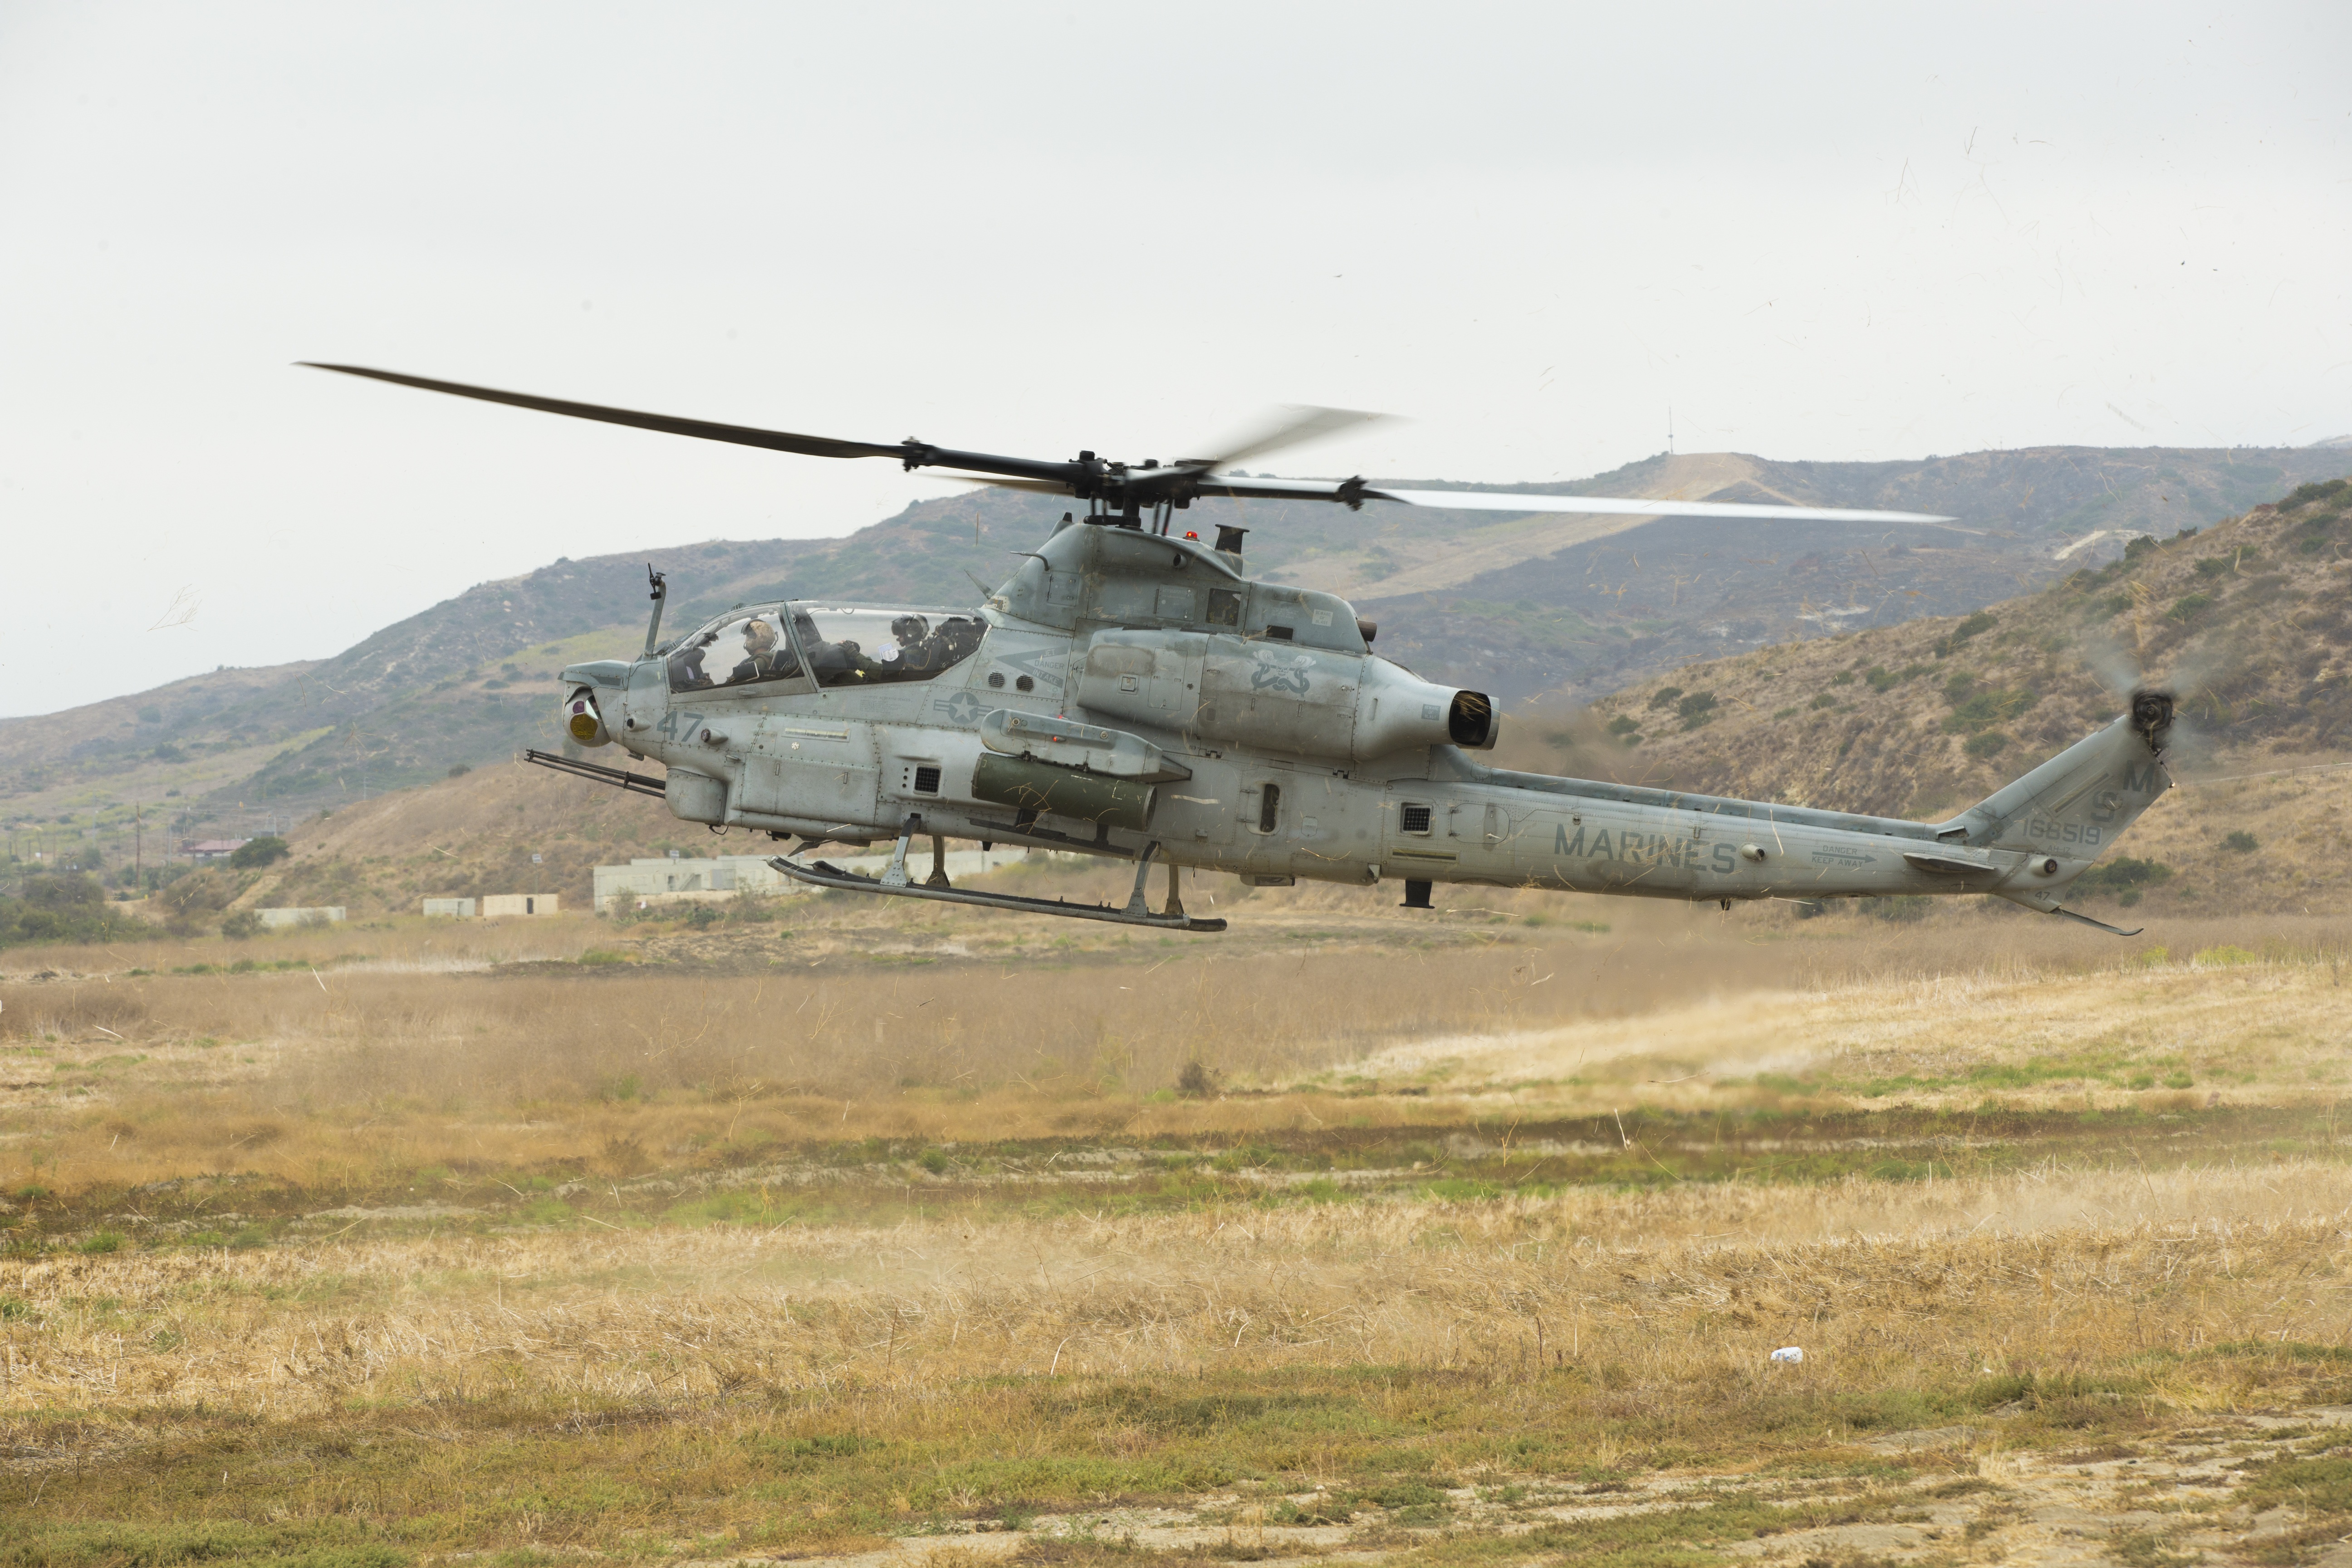 Helicopter Marines Attack Helicopter 5184x3456